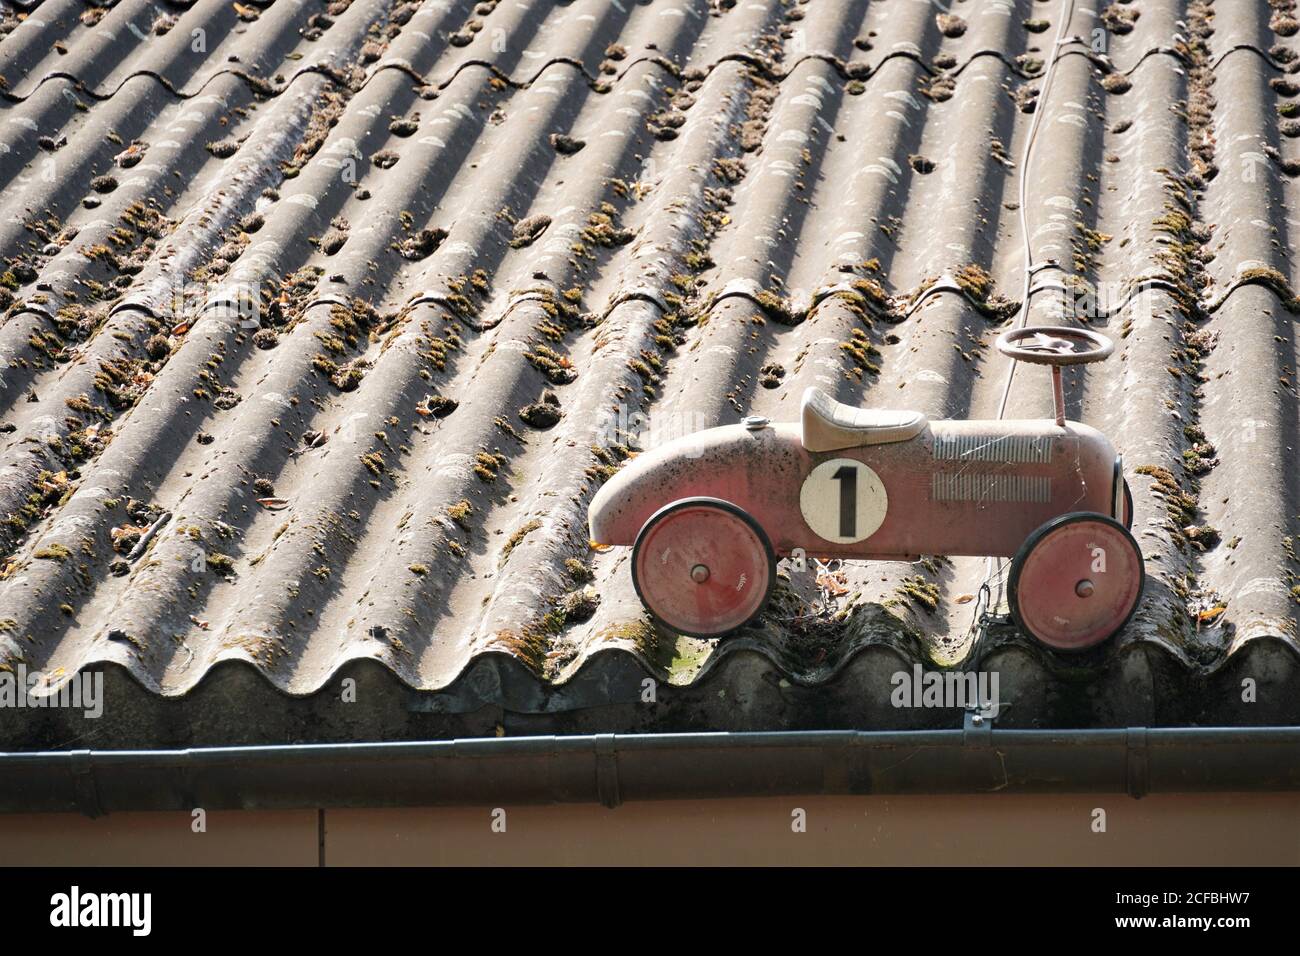 An red swing car placed on an old gray corrugate fibre cement roof covered with moss. The car is old fashioned and has number 1 painted on it. Stock Photo